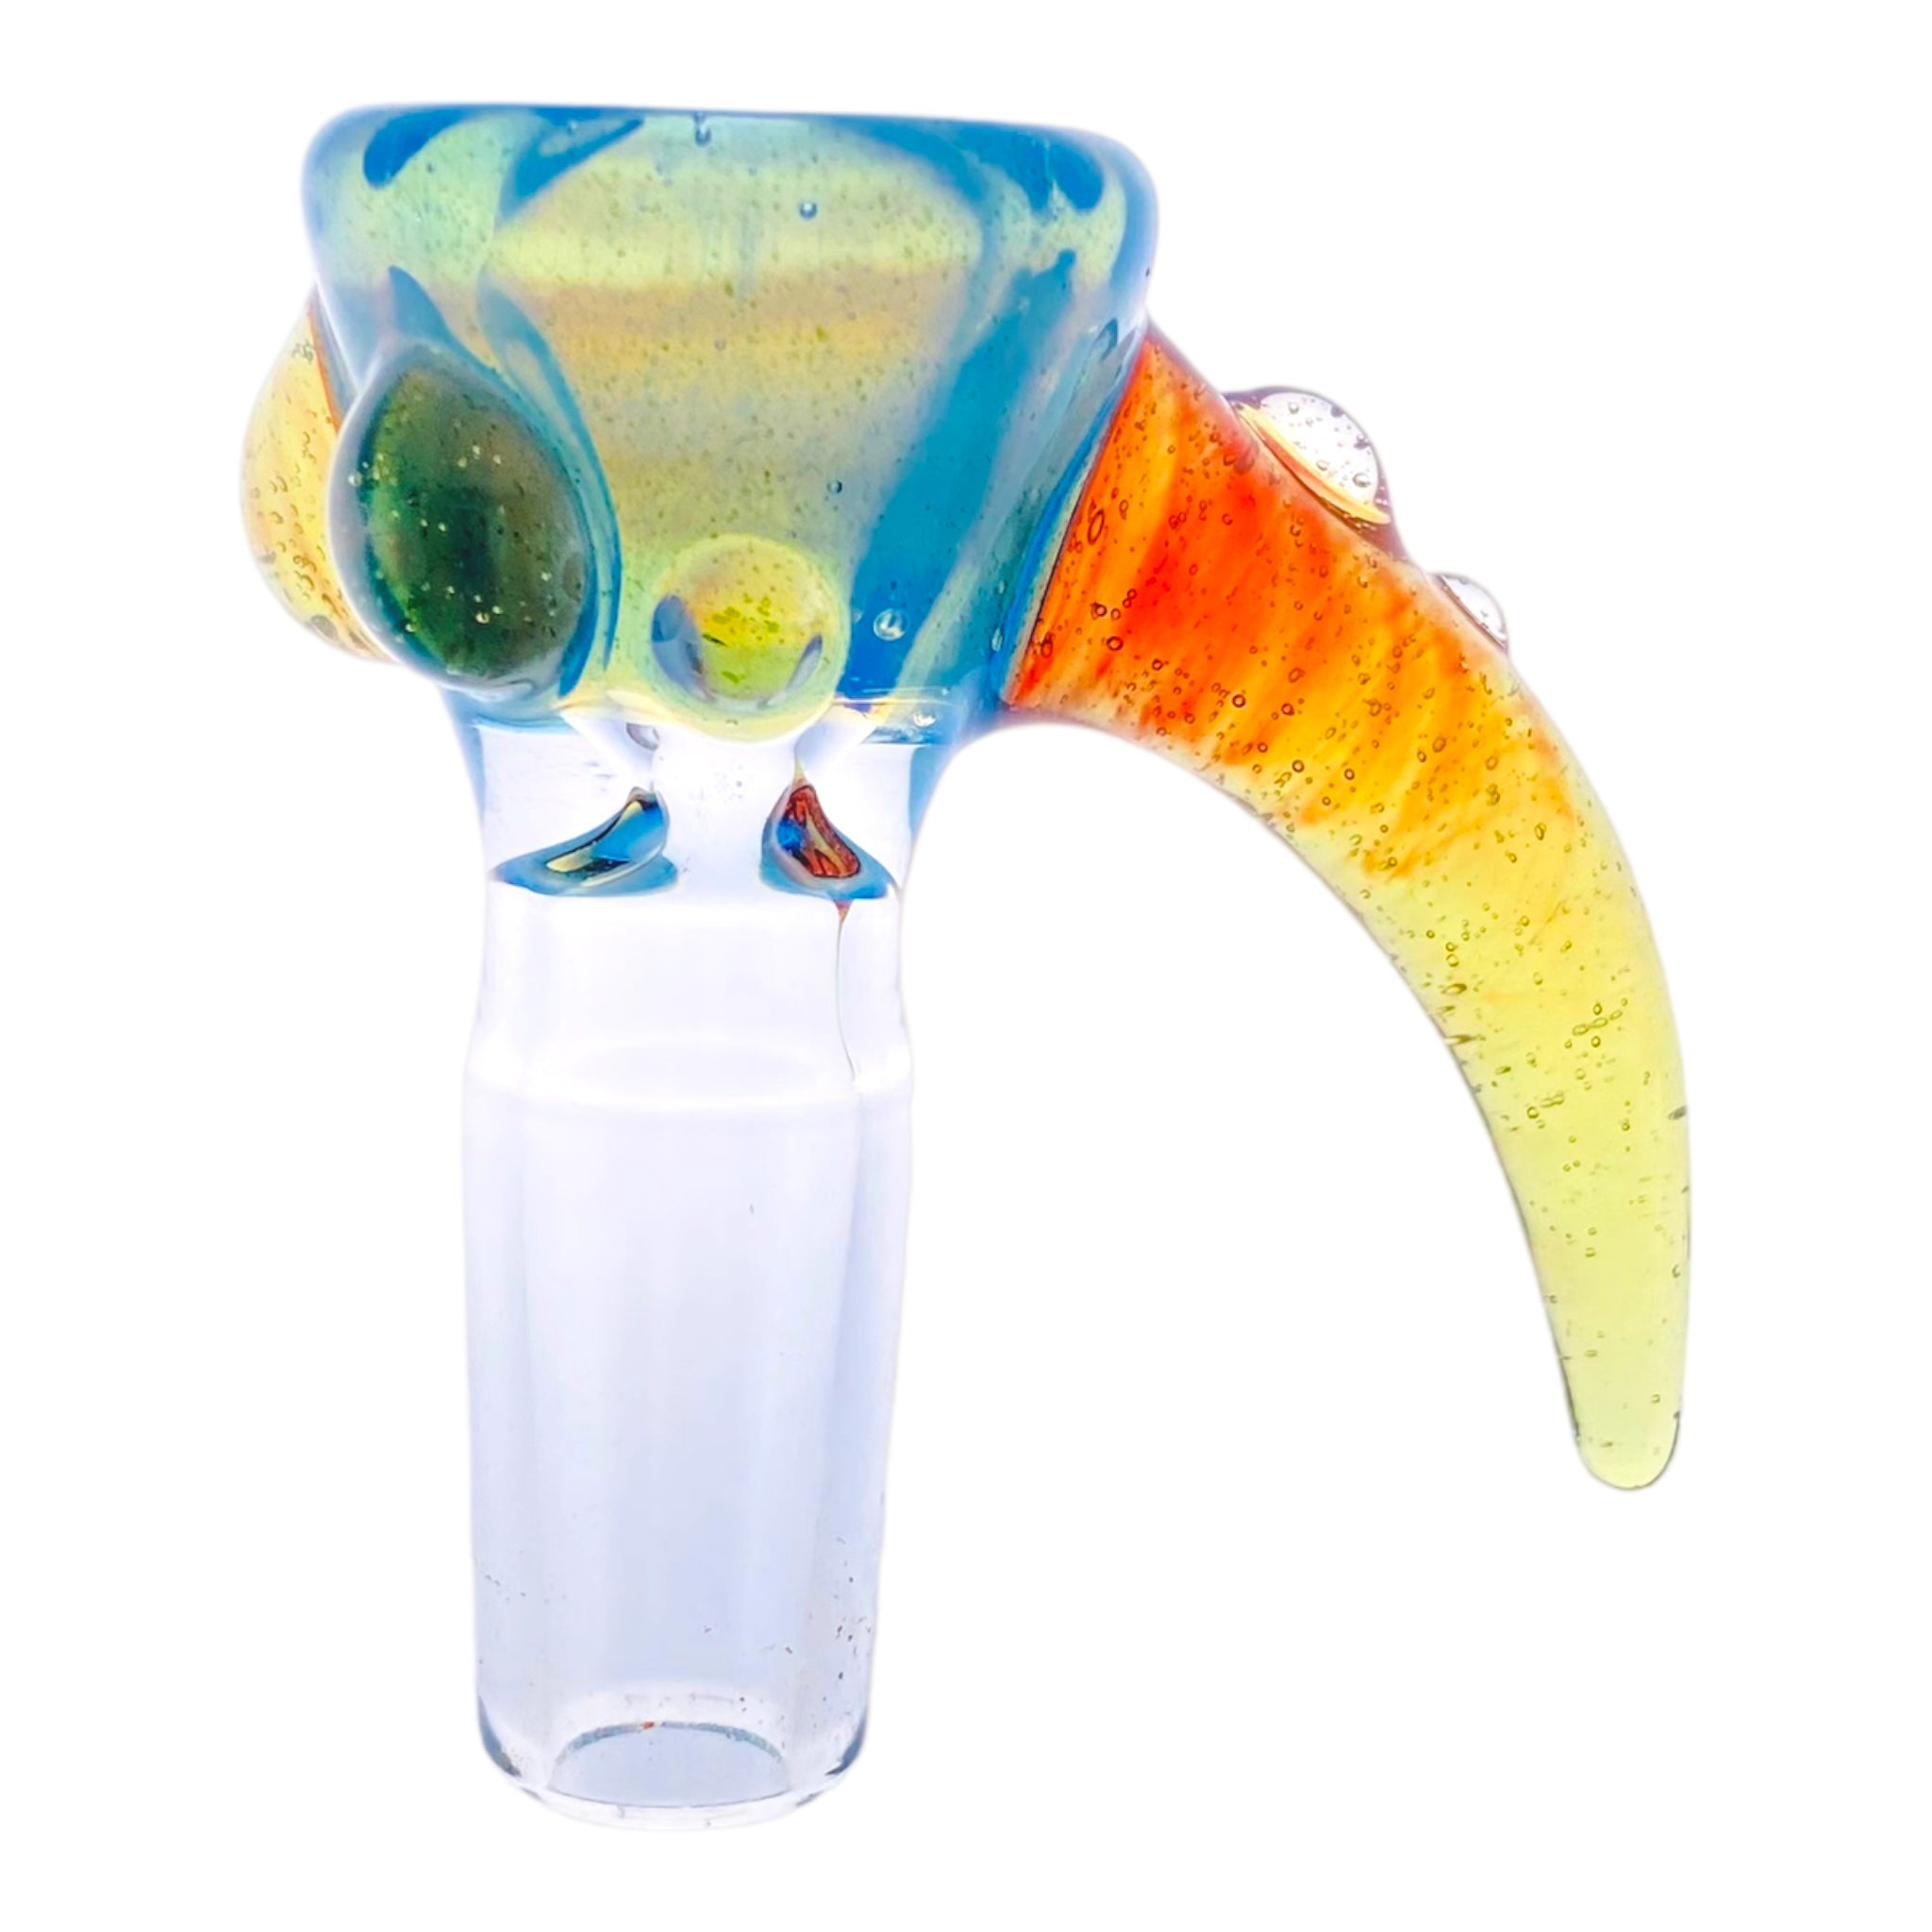 Arko Glass - 14mm Flower Bowl - Tonic Blue Bowl With Fire Fade Handle